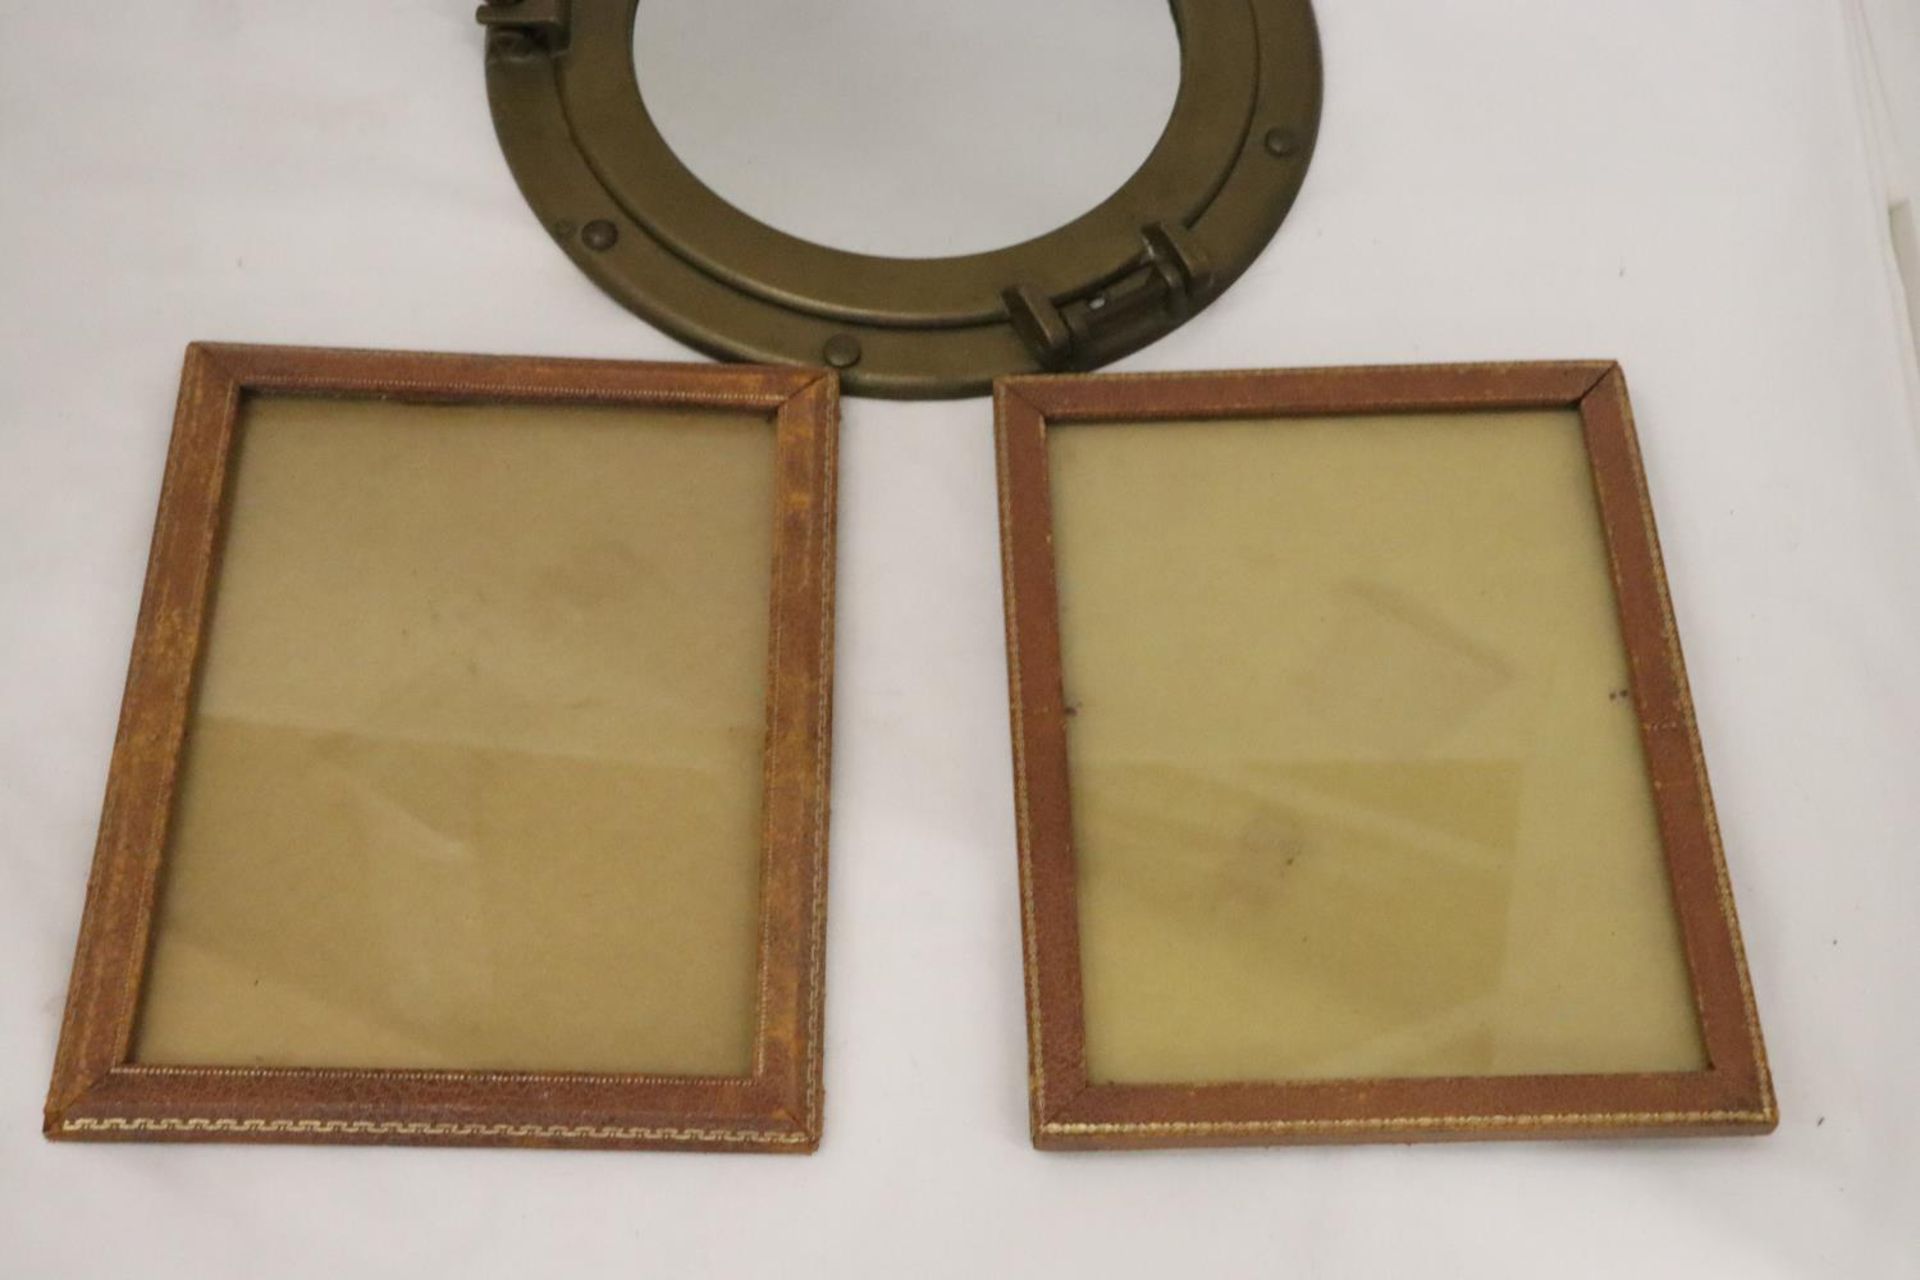 A BRASS PORTHOLE MIRROR WITH TWO WOODEN FRAMES - Image 4 of 9